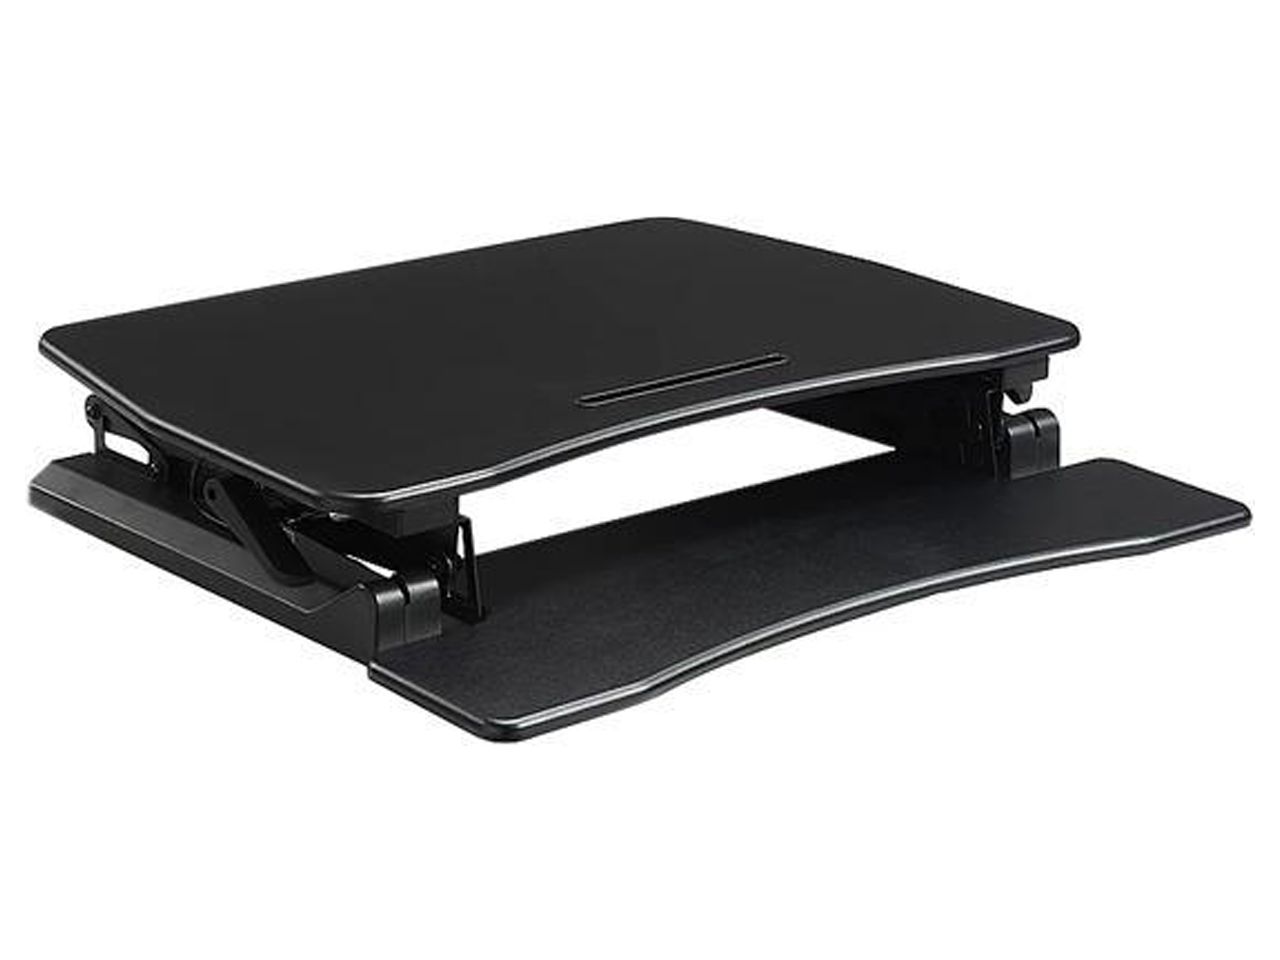 Universal Sit-to-Stand Desk Riser, Gas-Powered, 32", Black - image 2 of 4